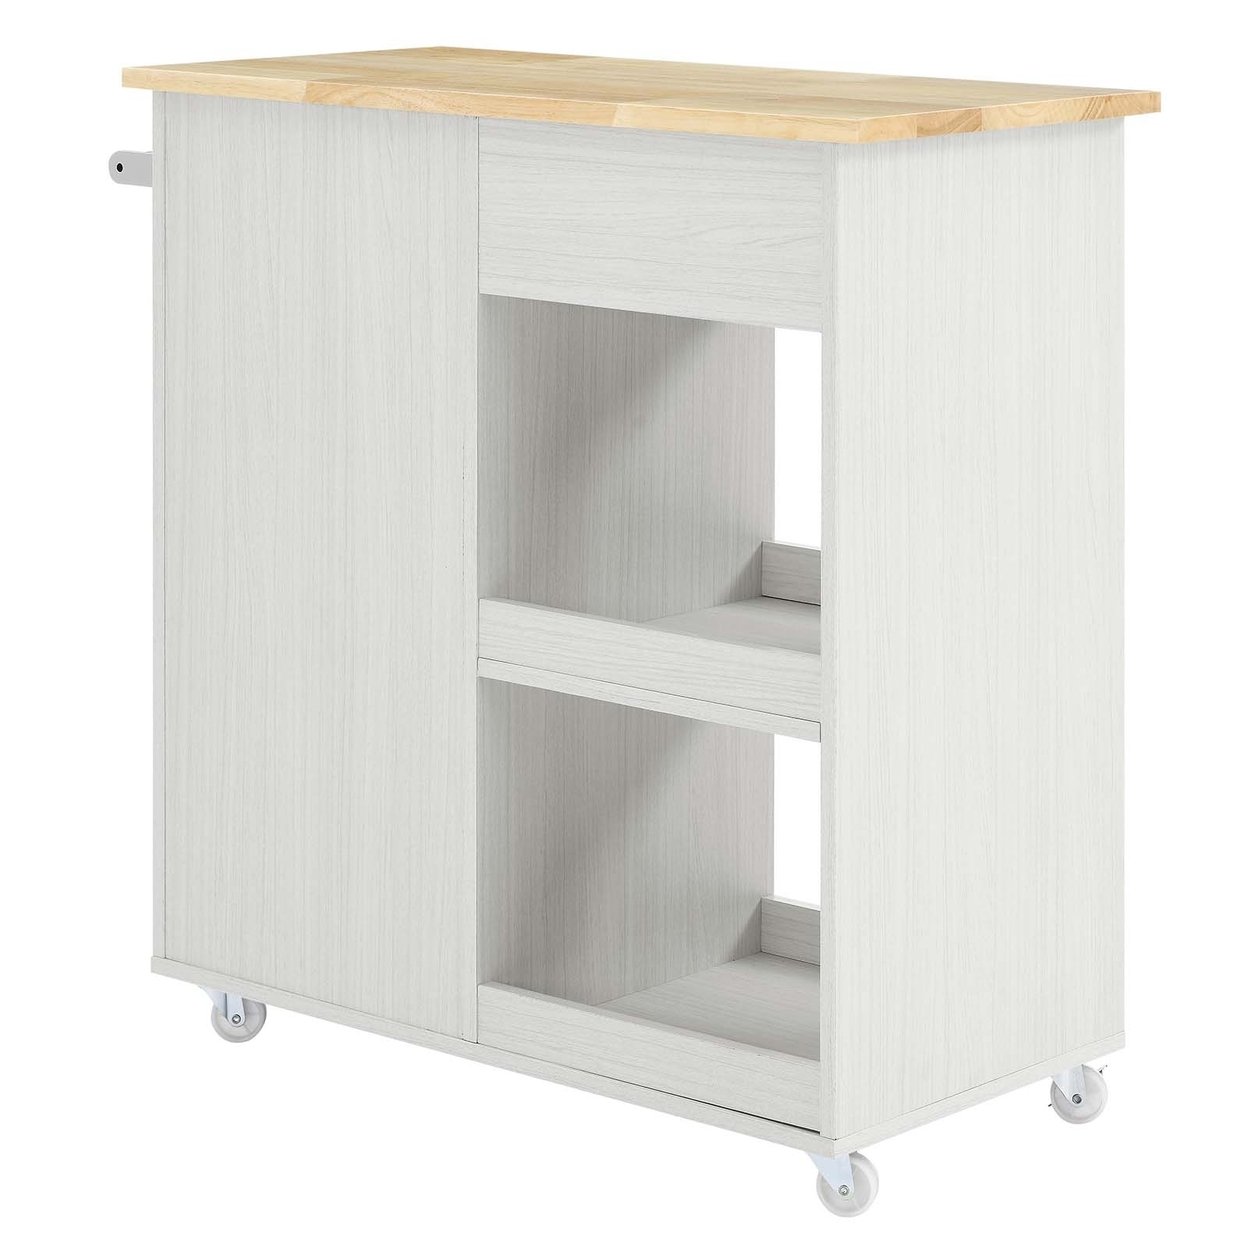 Culinary Kitchen Cart With Towel Bar, White Natural